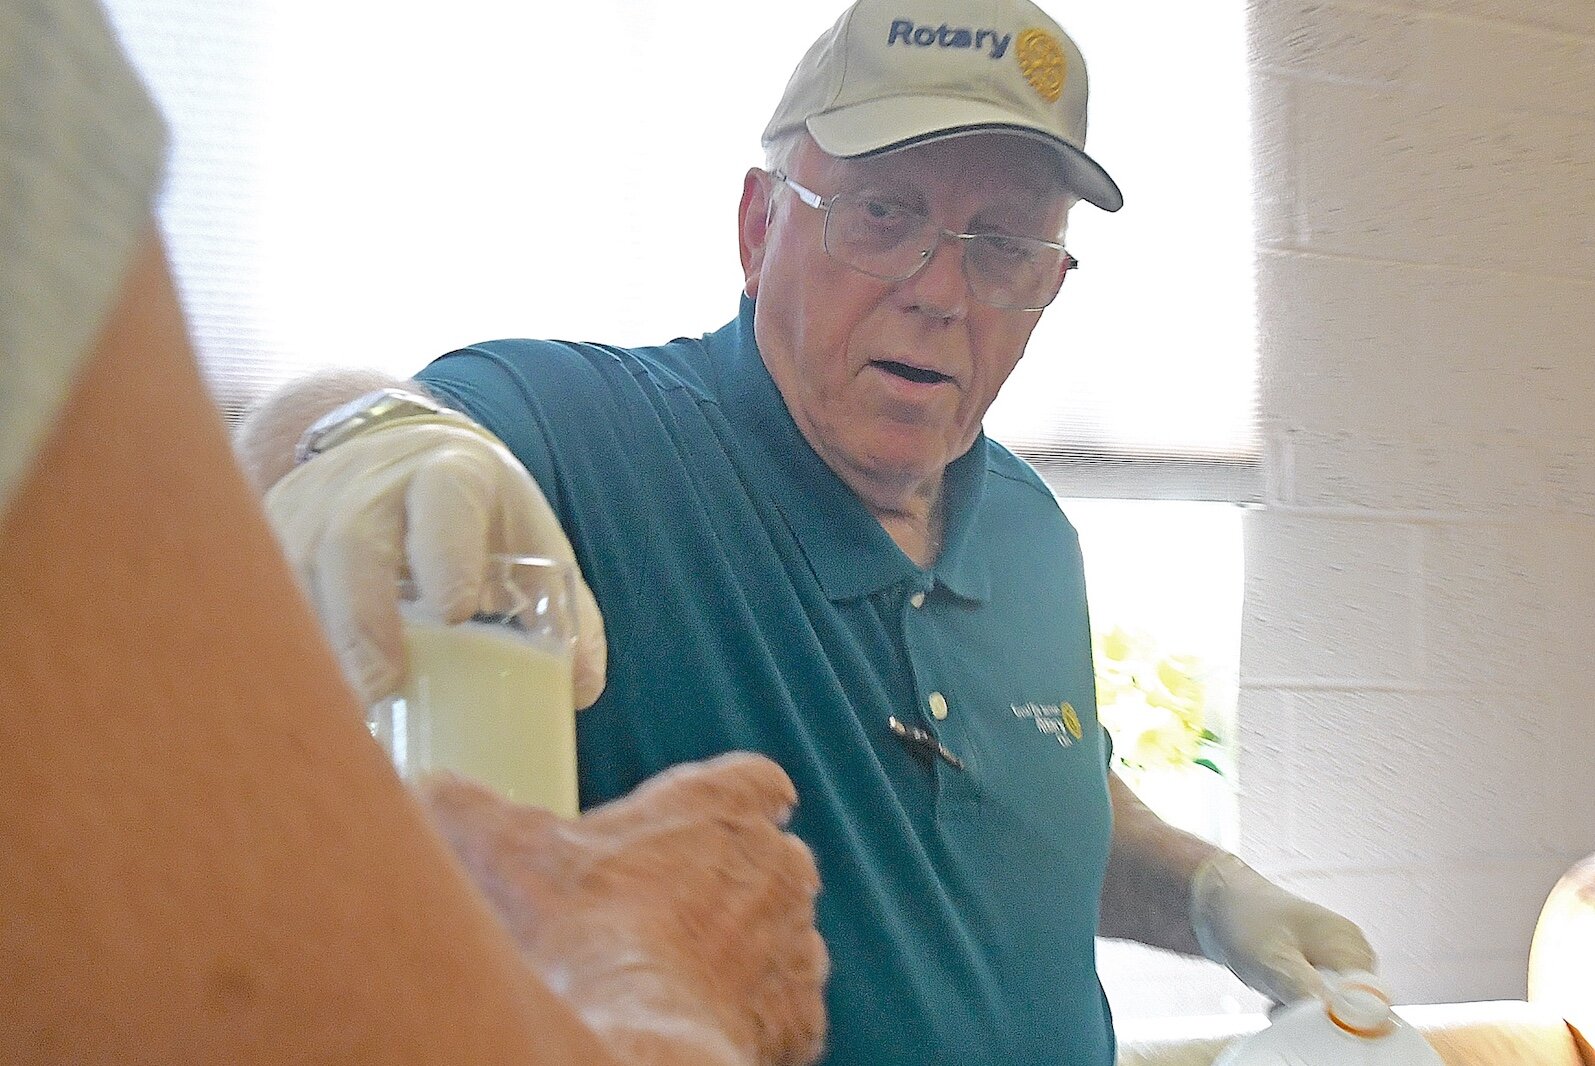 Rotary volunteer George Bratcher serves a glass of milk to a customer at St. Thomas Episcopal Church’s breakfast program.